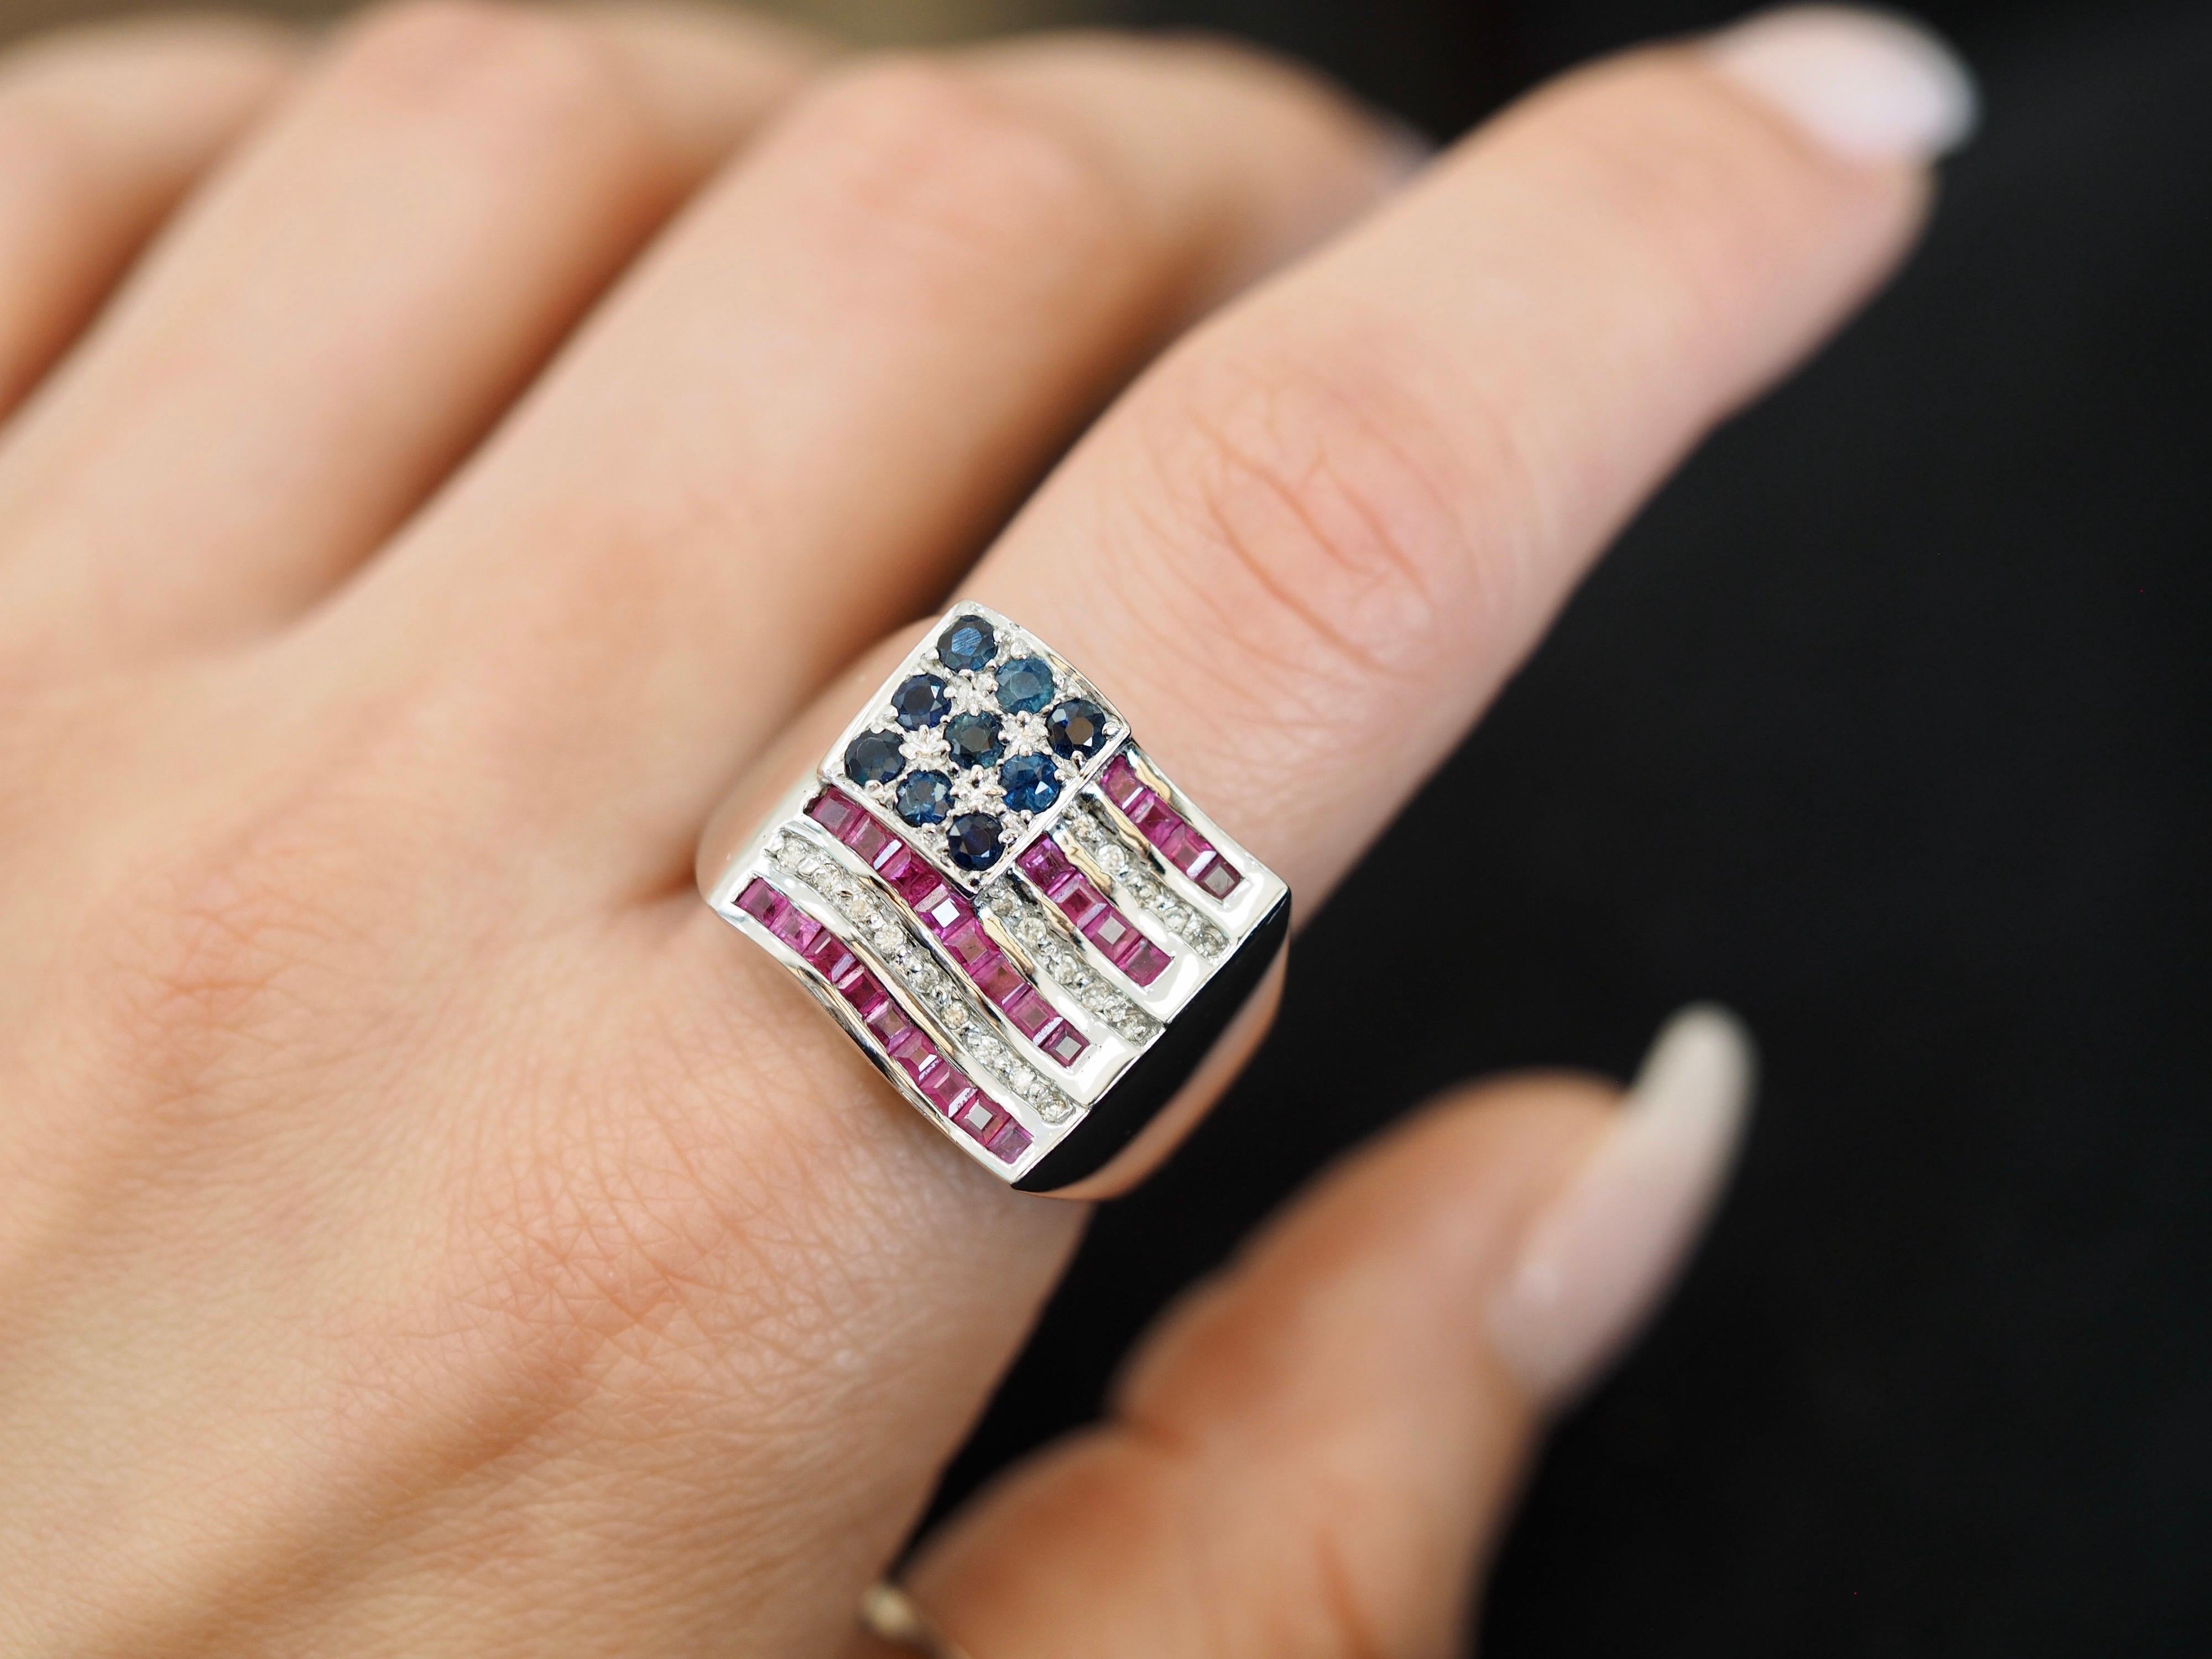 Beautiful American Flag statement ring. This ring is made up of red rubies, white diamonds and blue sapphire set in 14 karat white gold. The way the ring was created allows for the perfect fit on the finger. Size 8, can be sized up or down